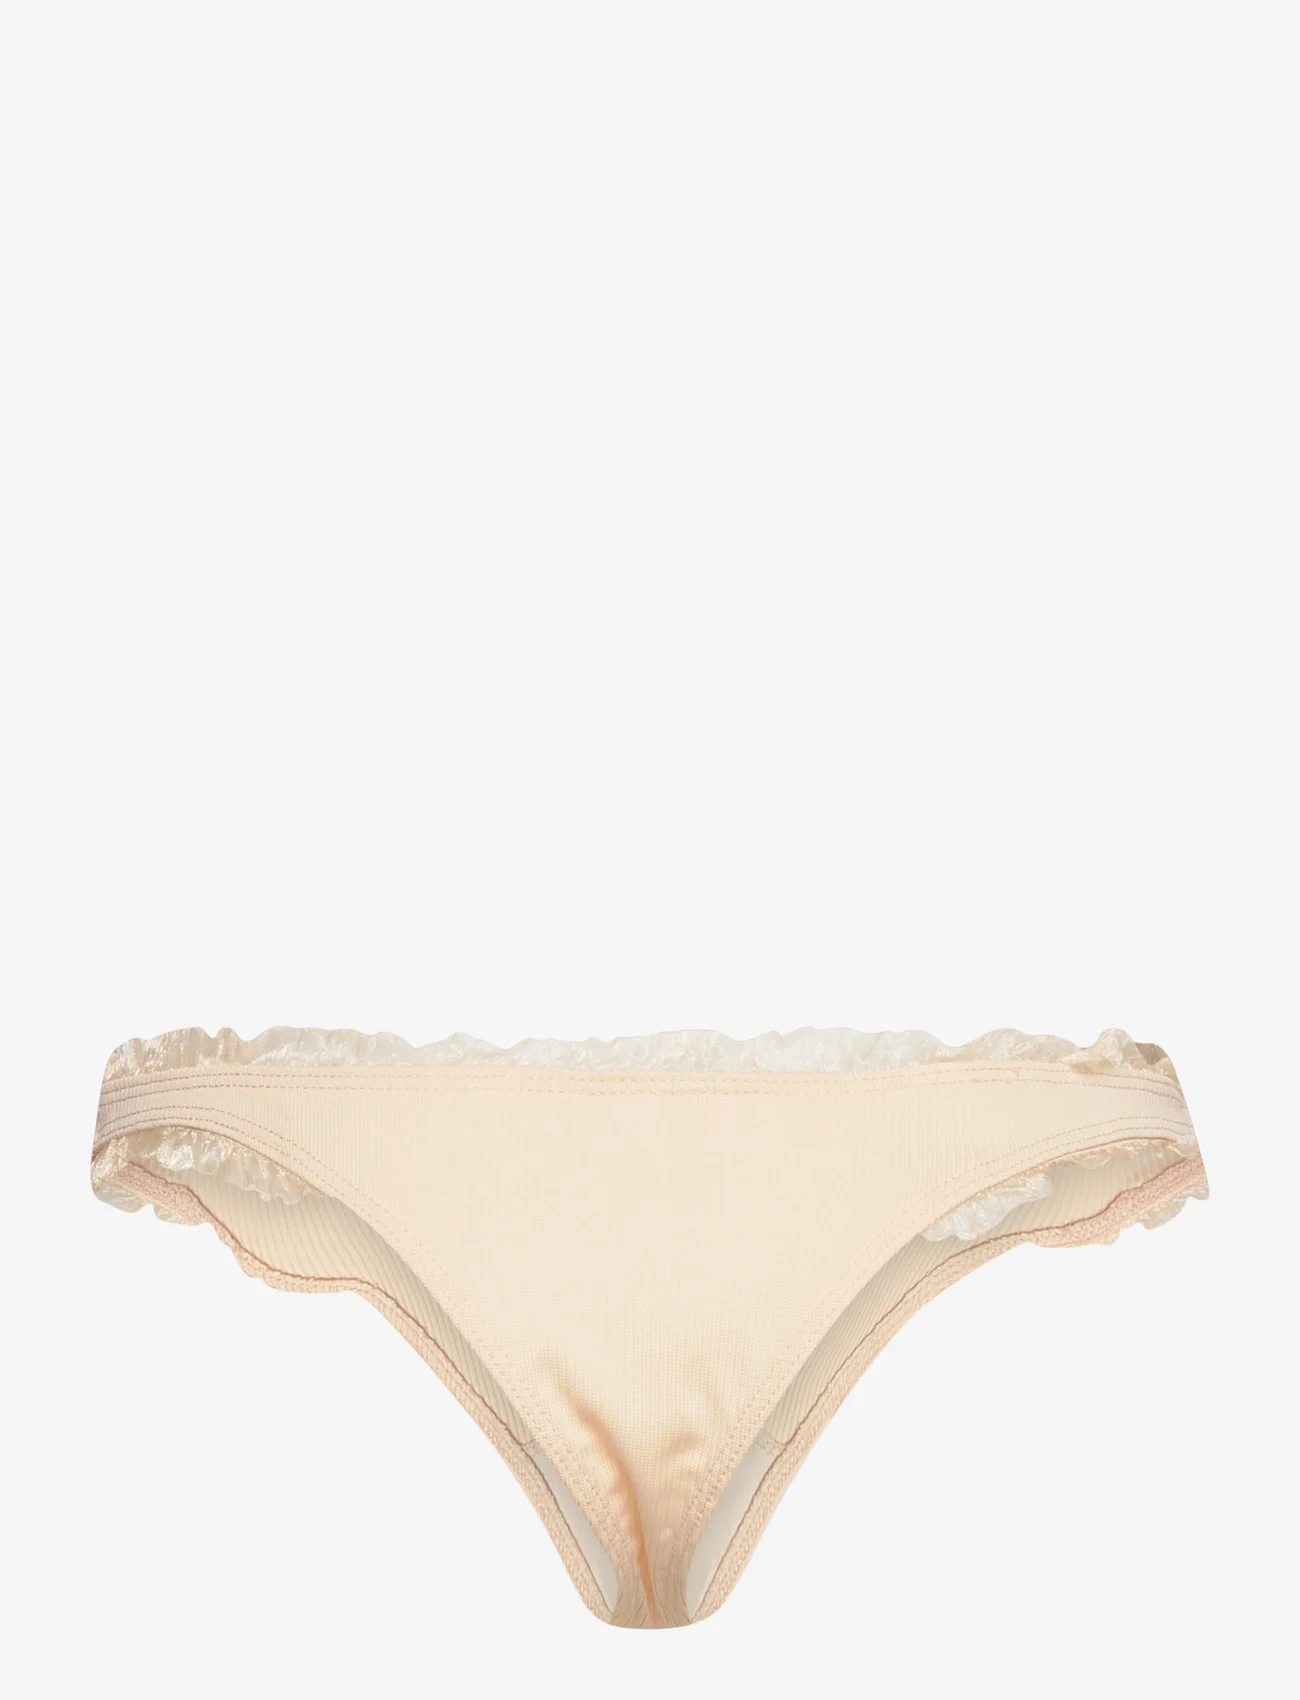 OW Collection - LUCKY Thong - lowest prices - light beige - 1